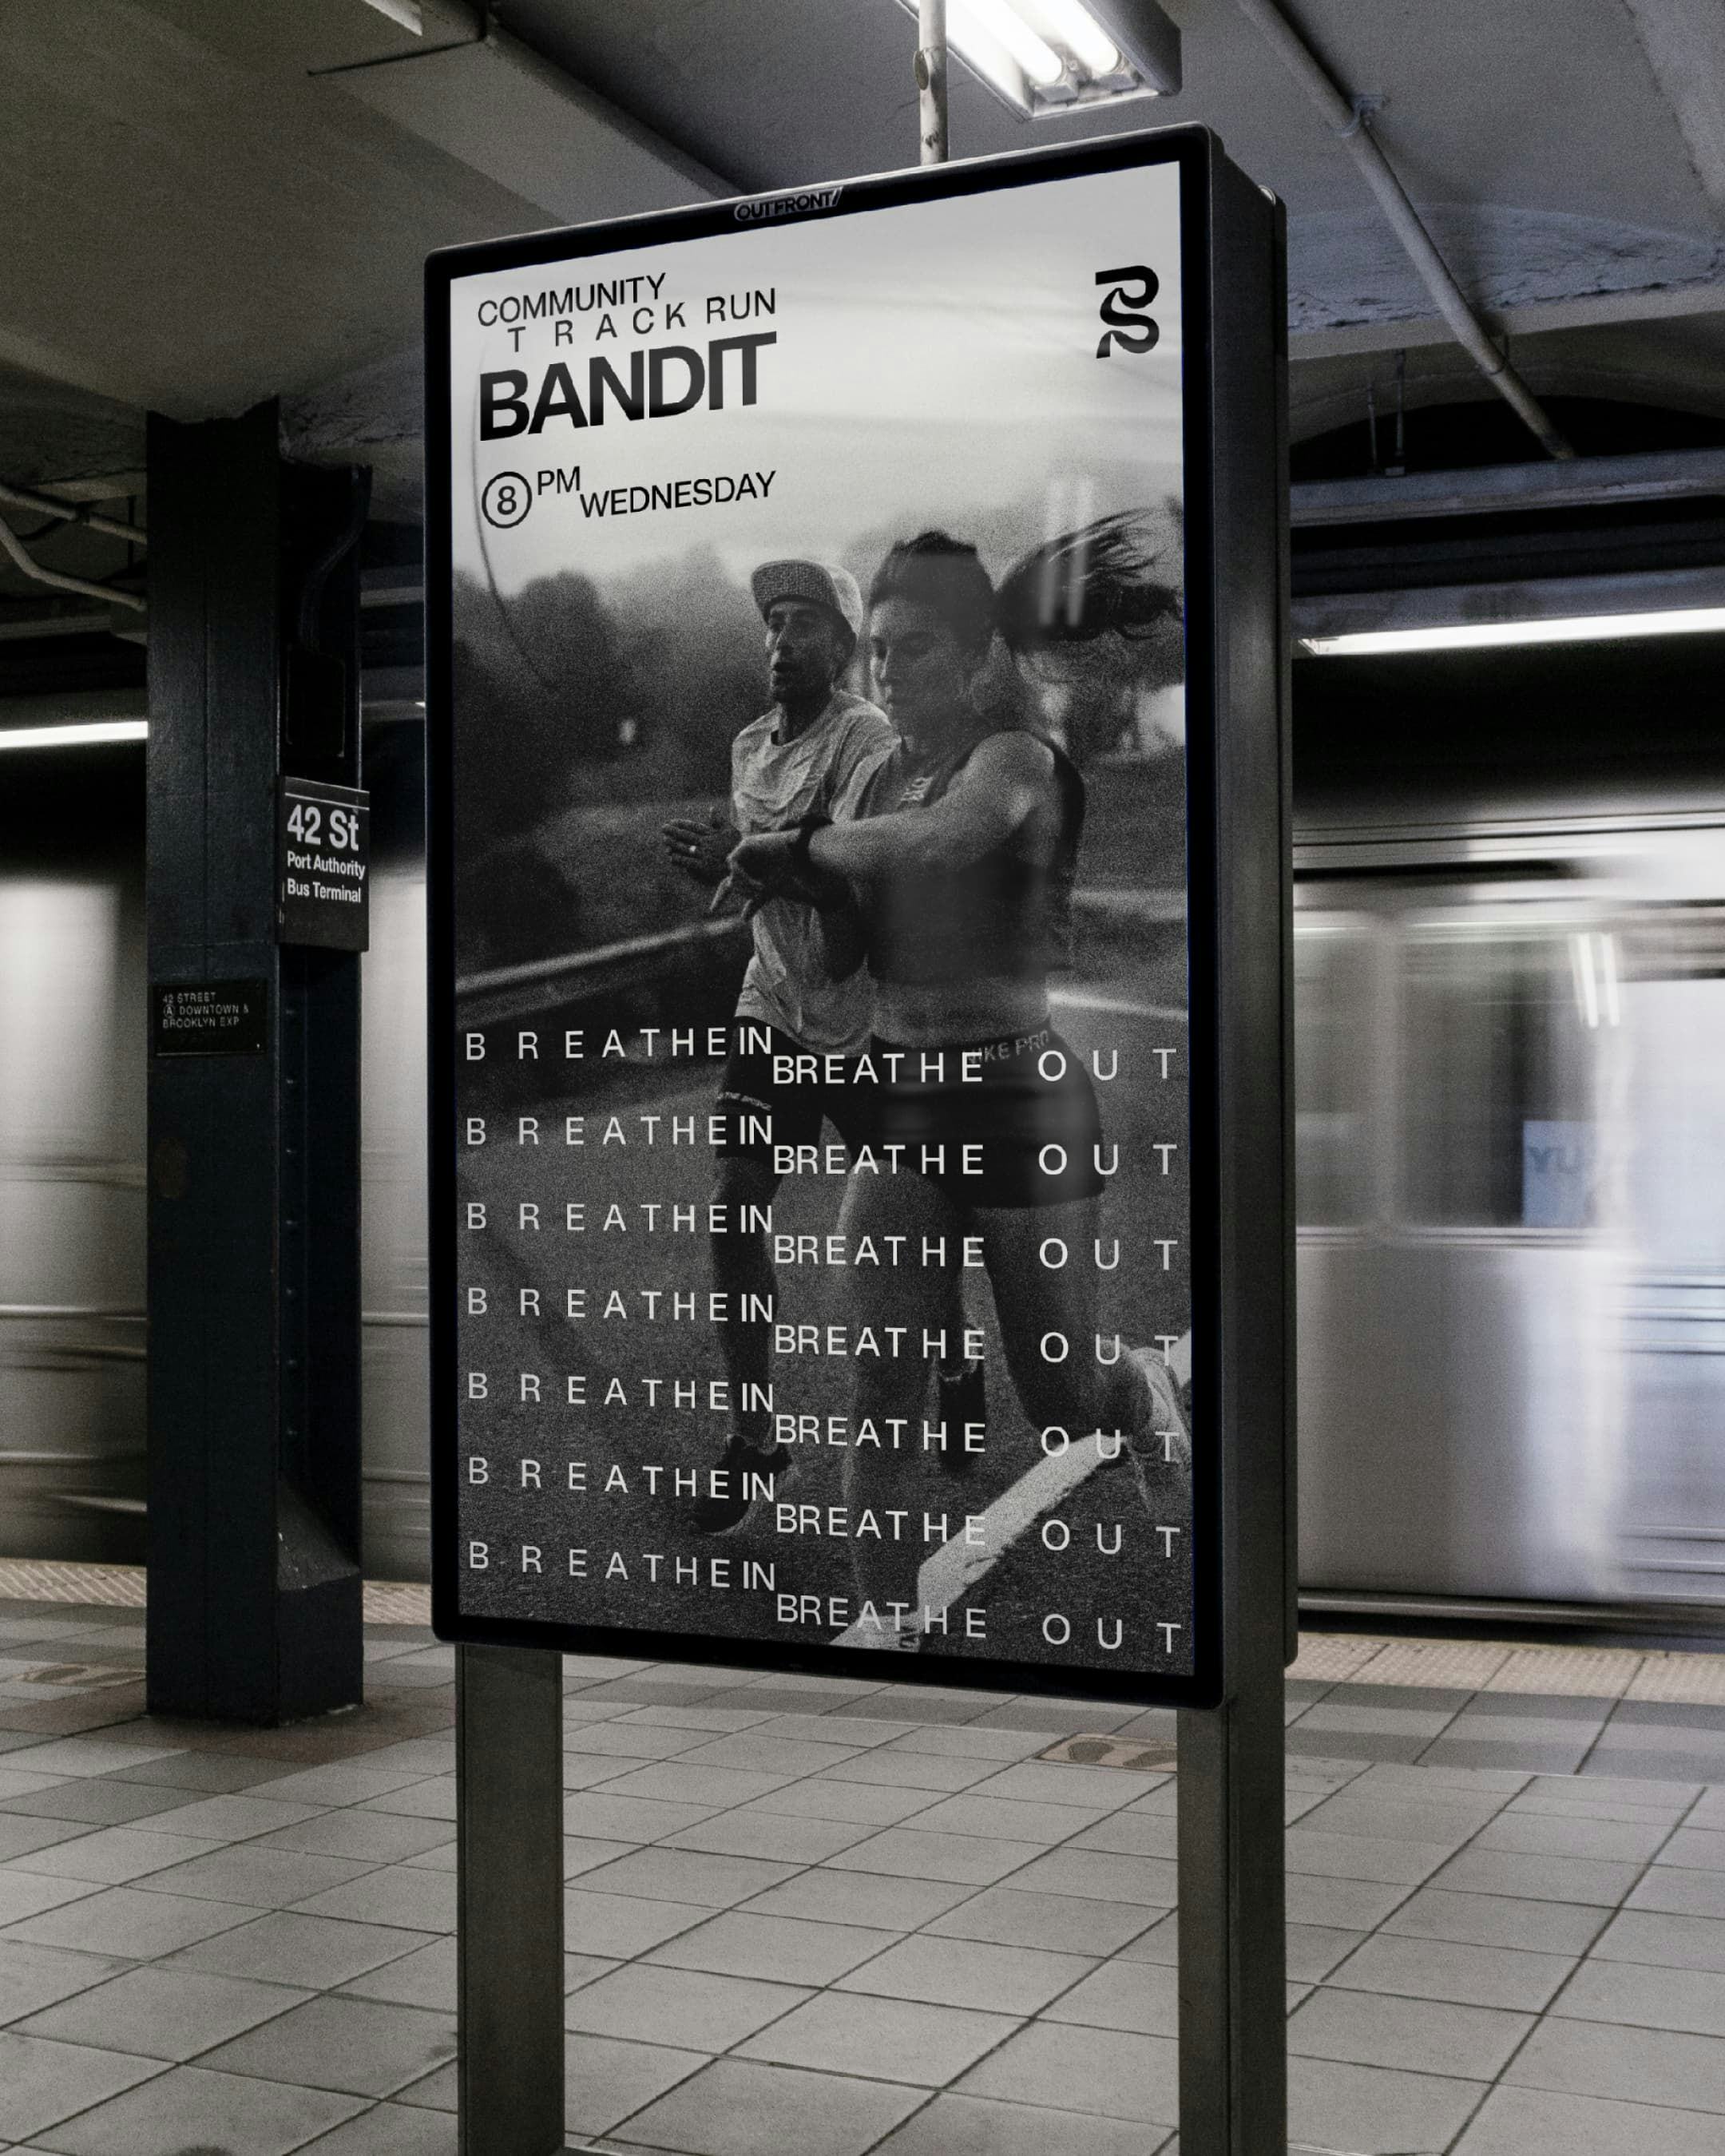 Brand identity, strategy, responsive design, and development for Bandit, an NYC born running company, for runners by runners.